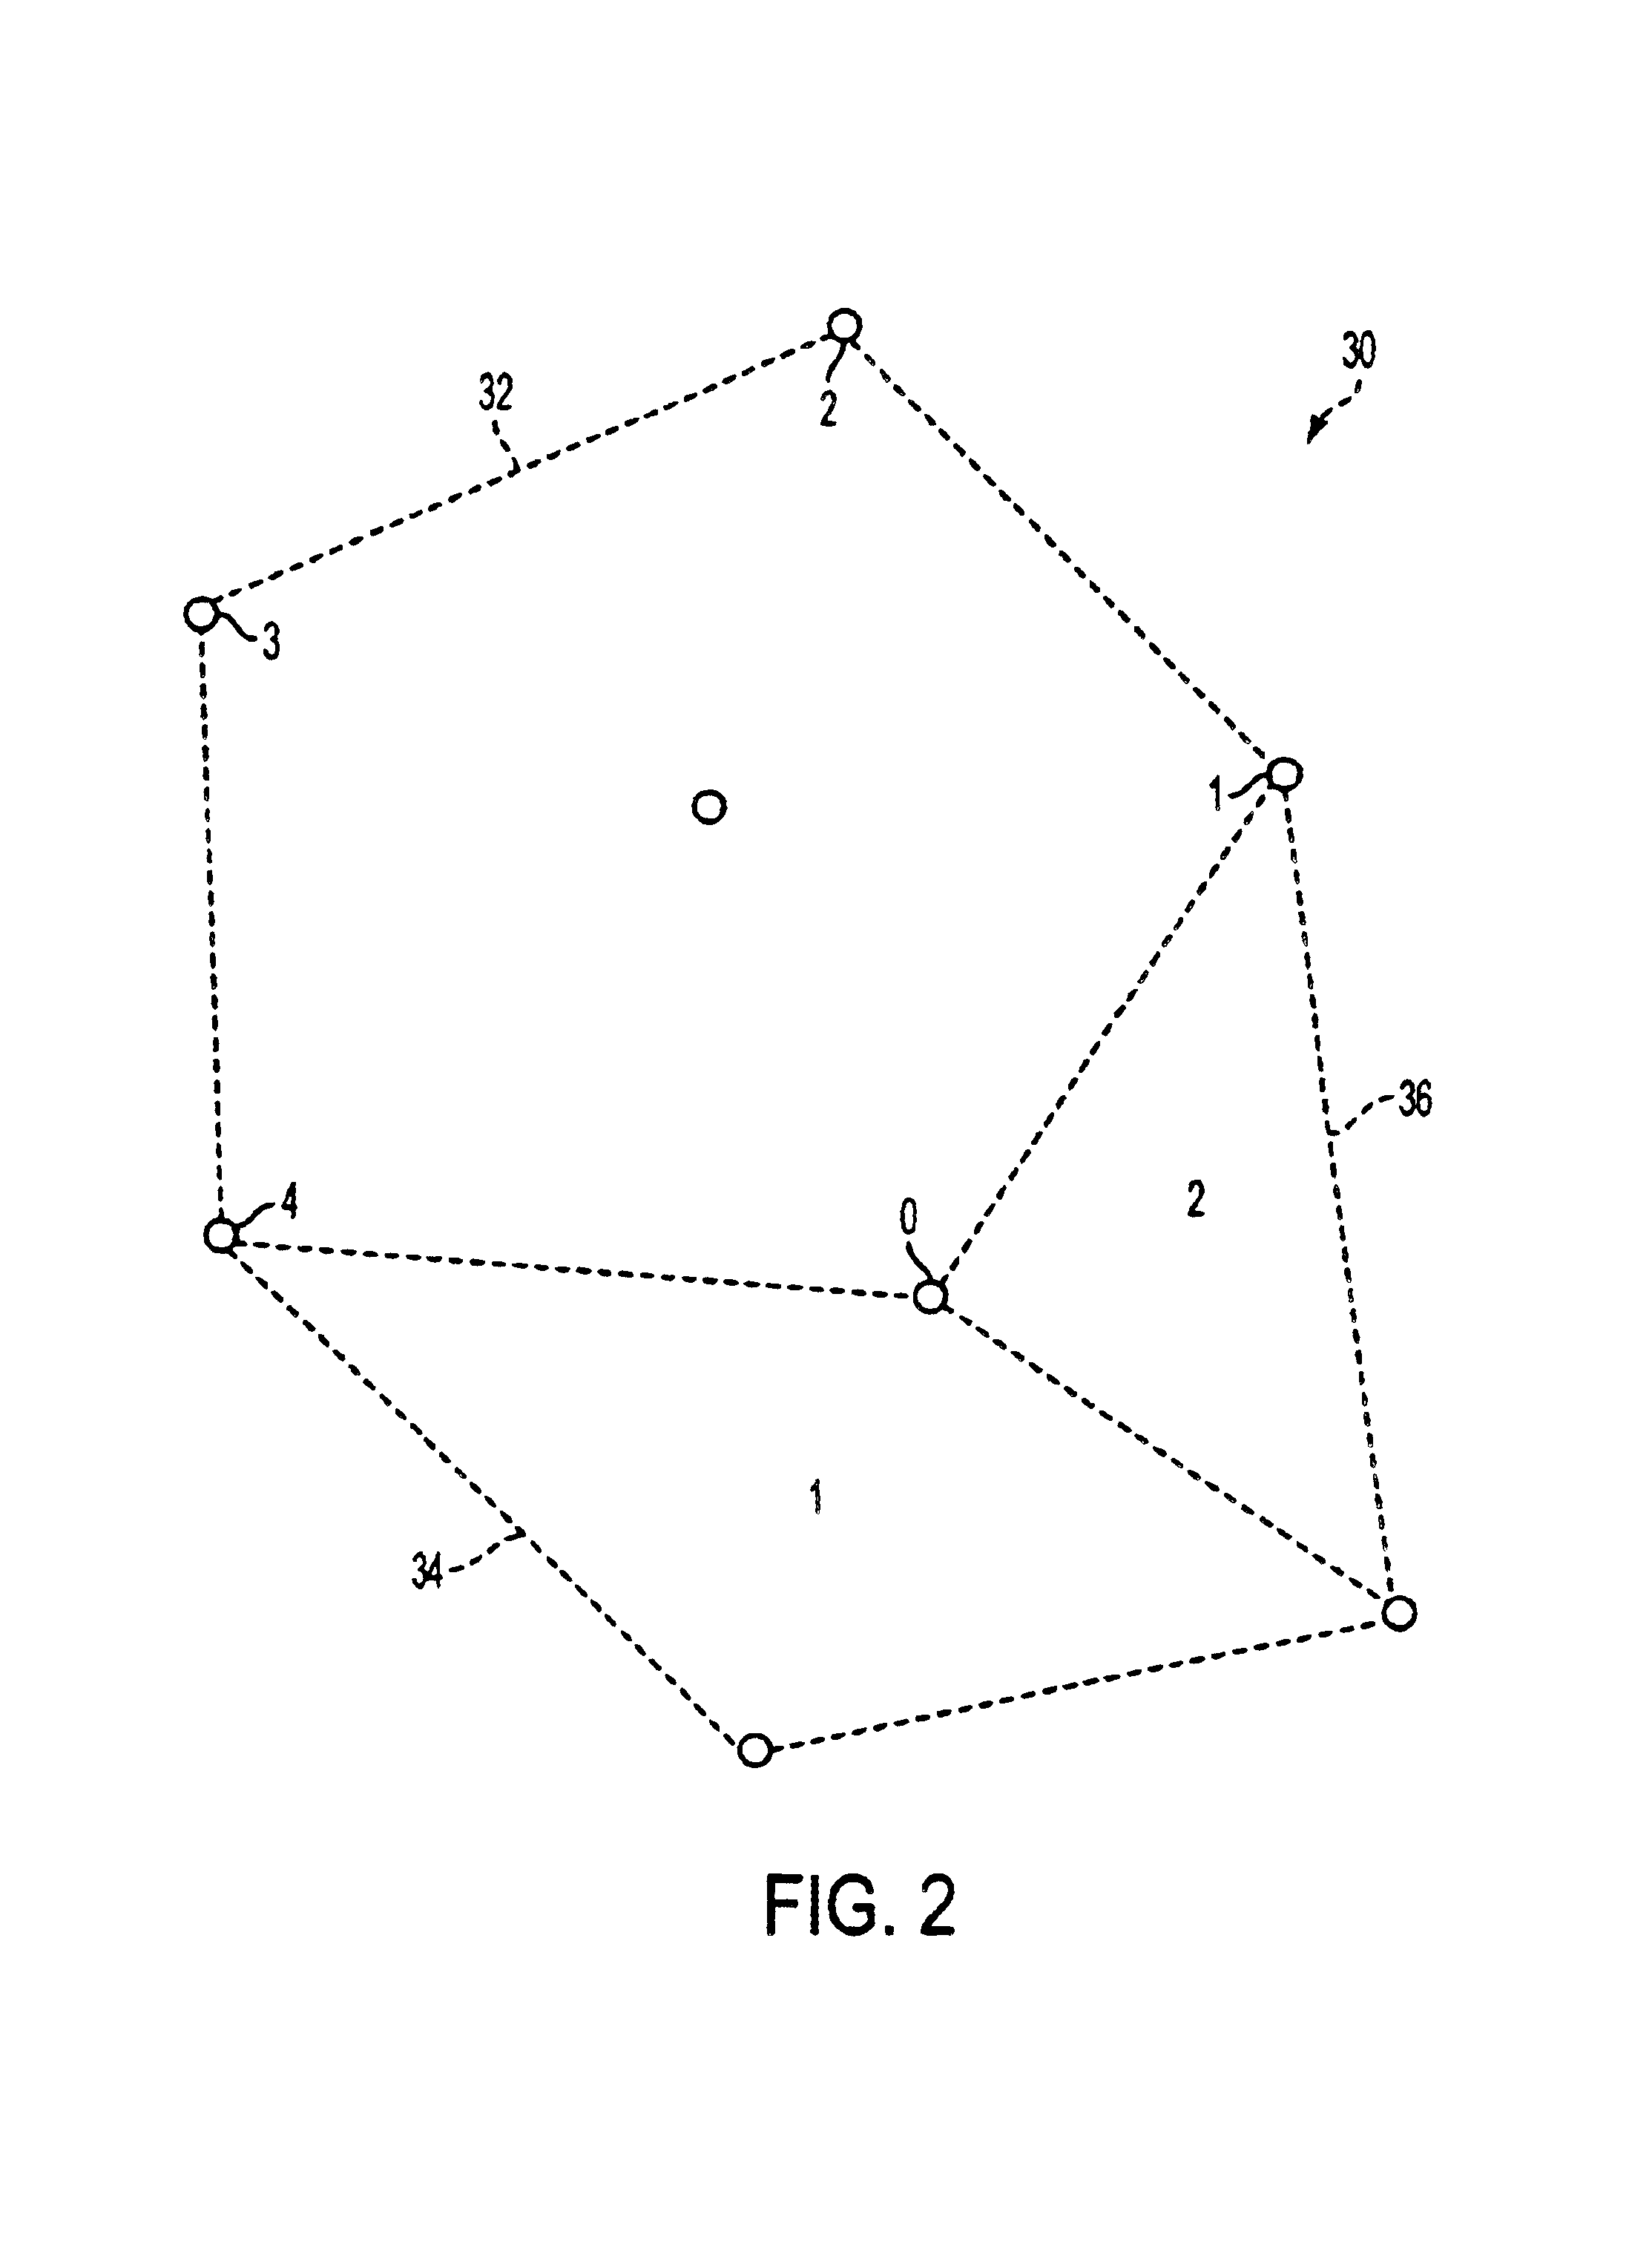 System for naming faces and vertices in an adaptive hierarchical subdivision surface